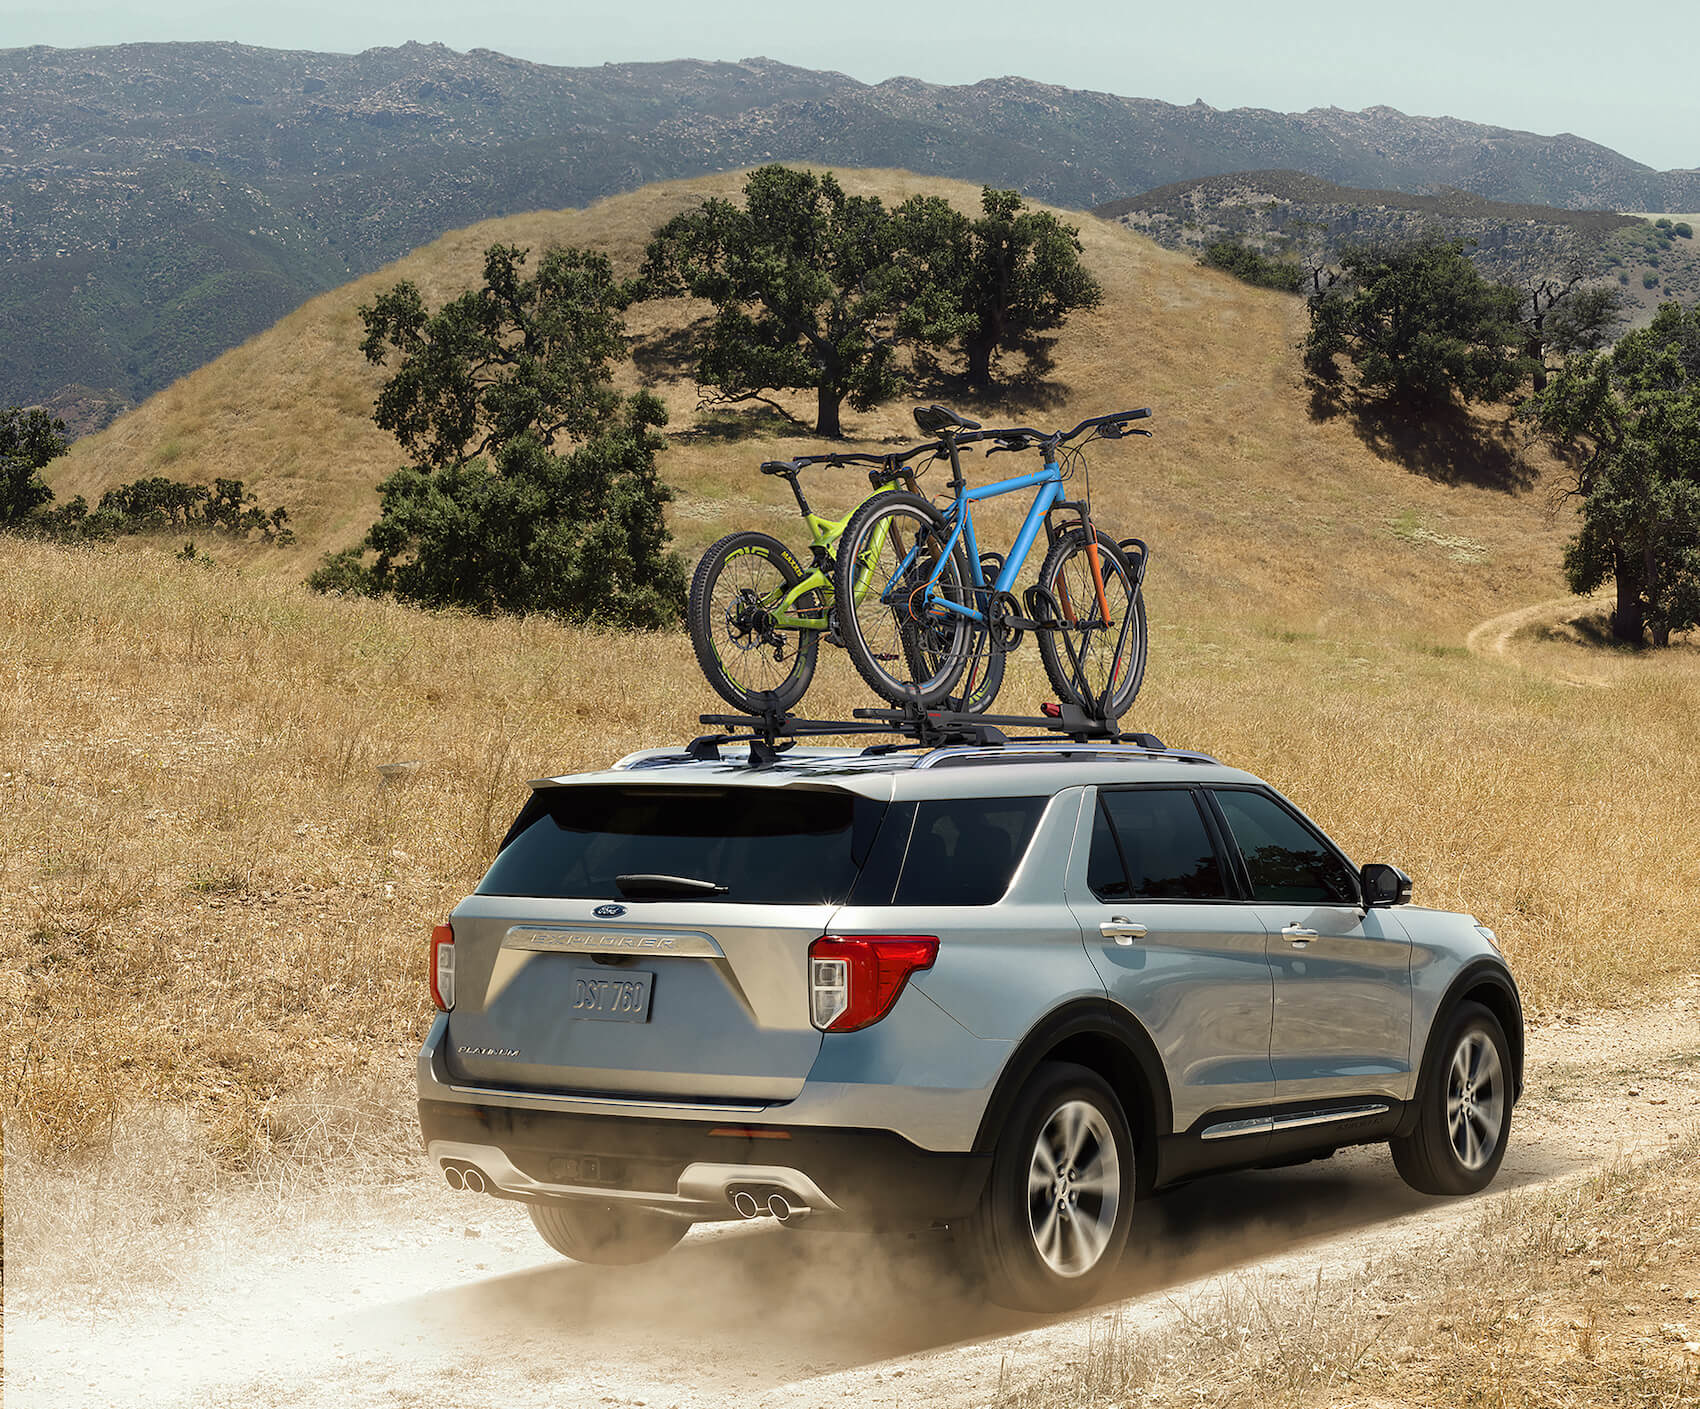 2021 Ford Explorer towing capacity